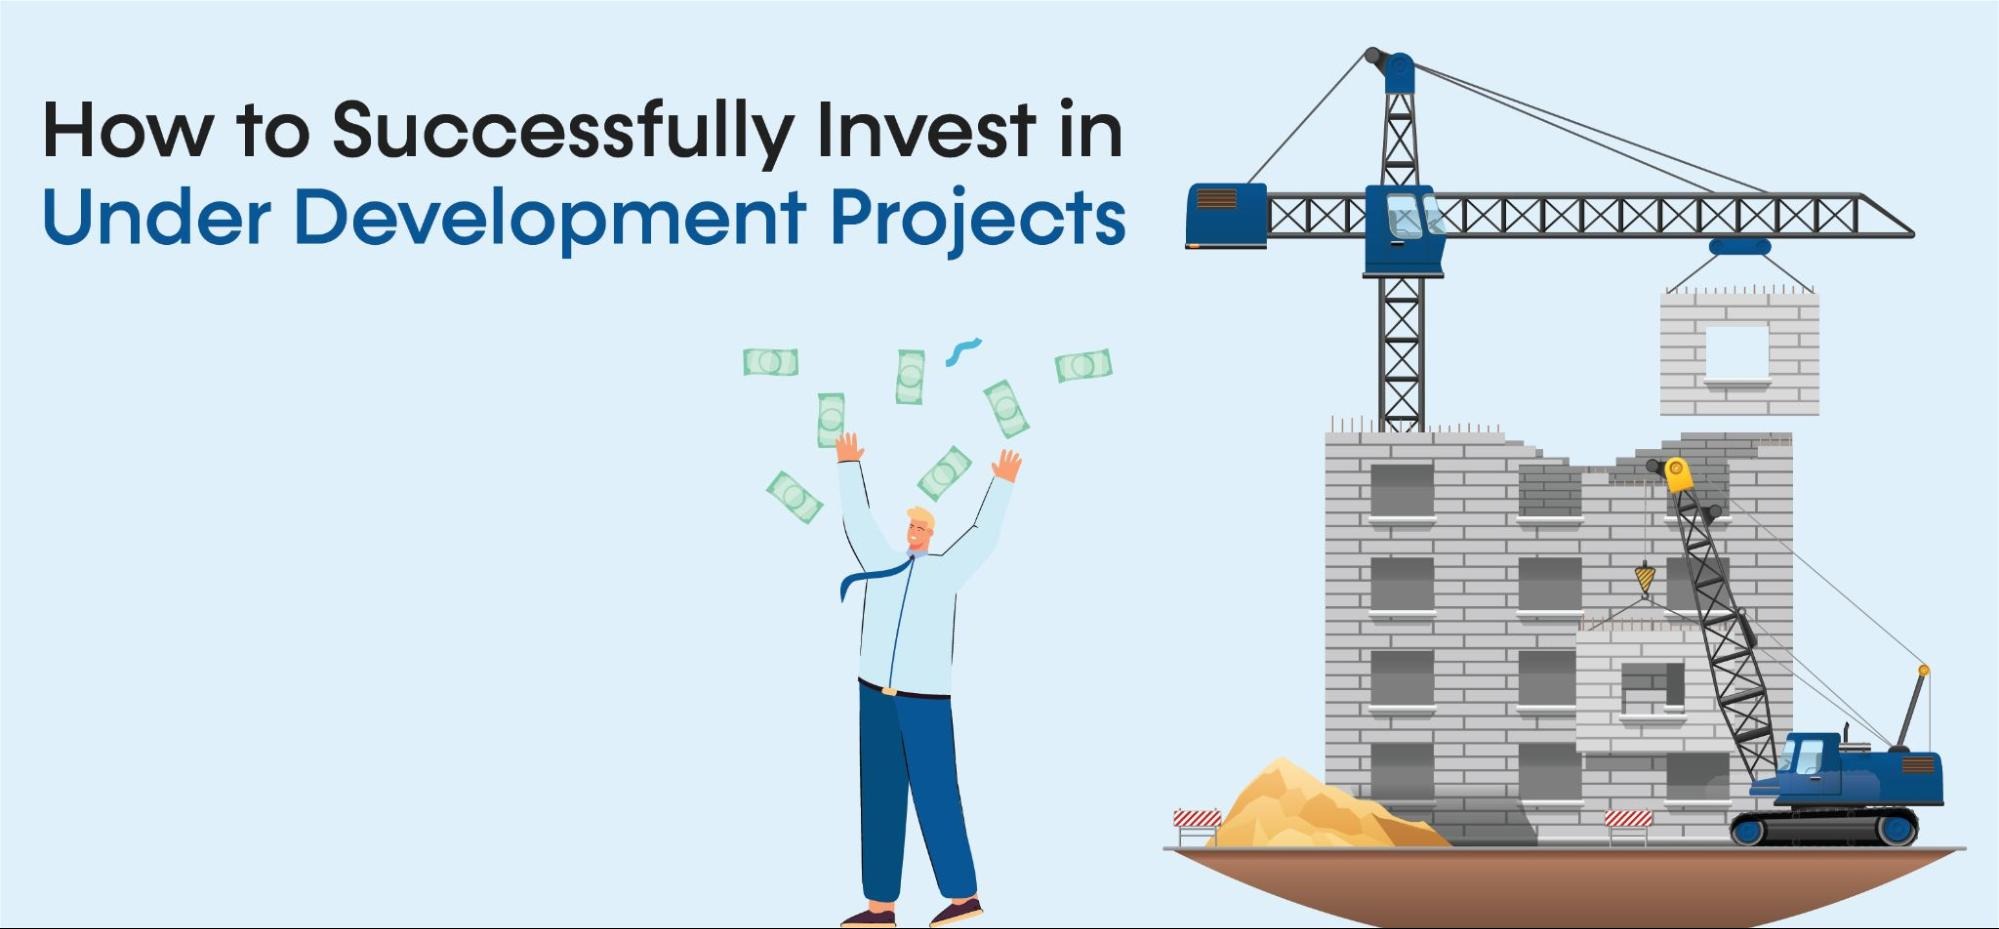 How to successfully invest in under development projects?